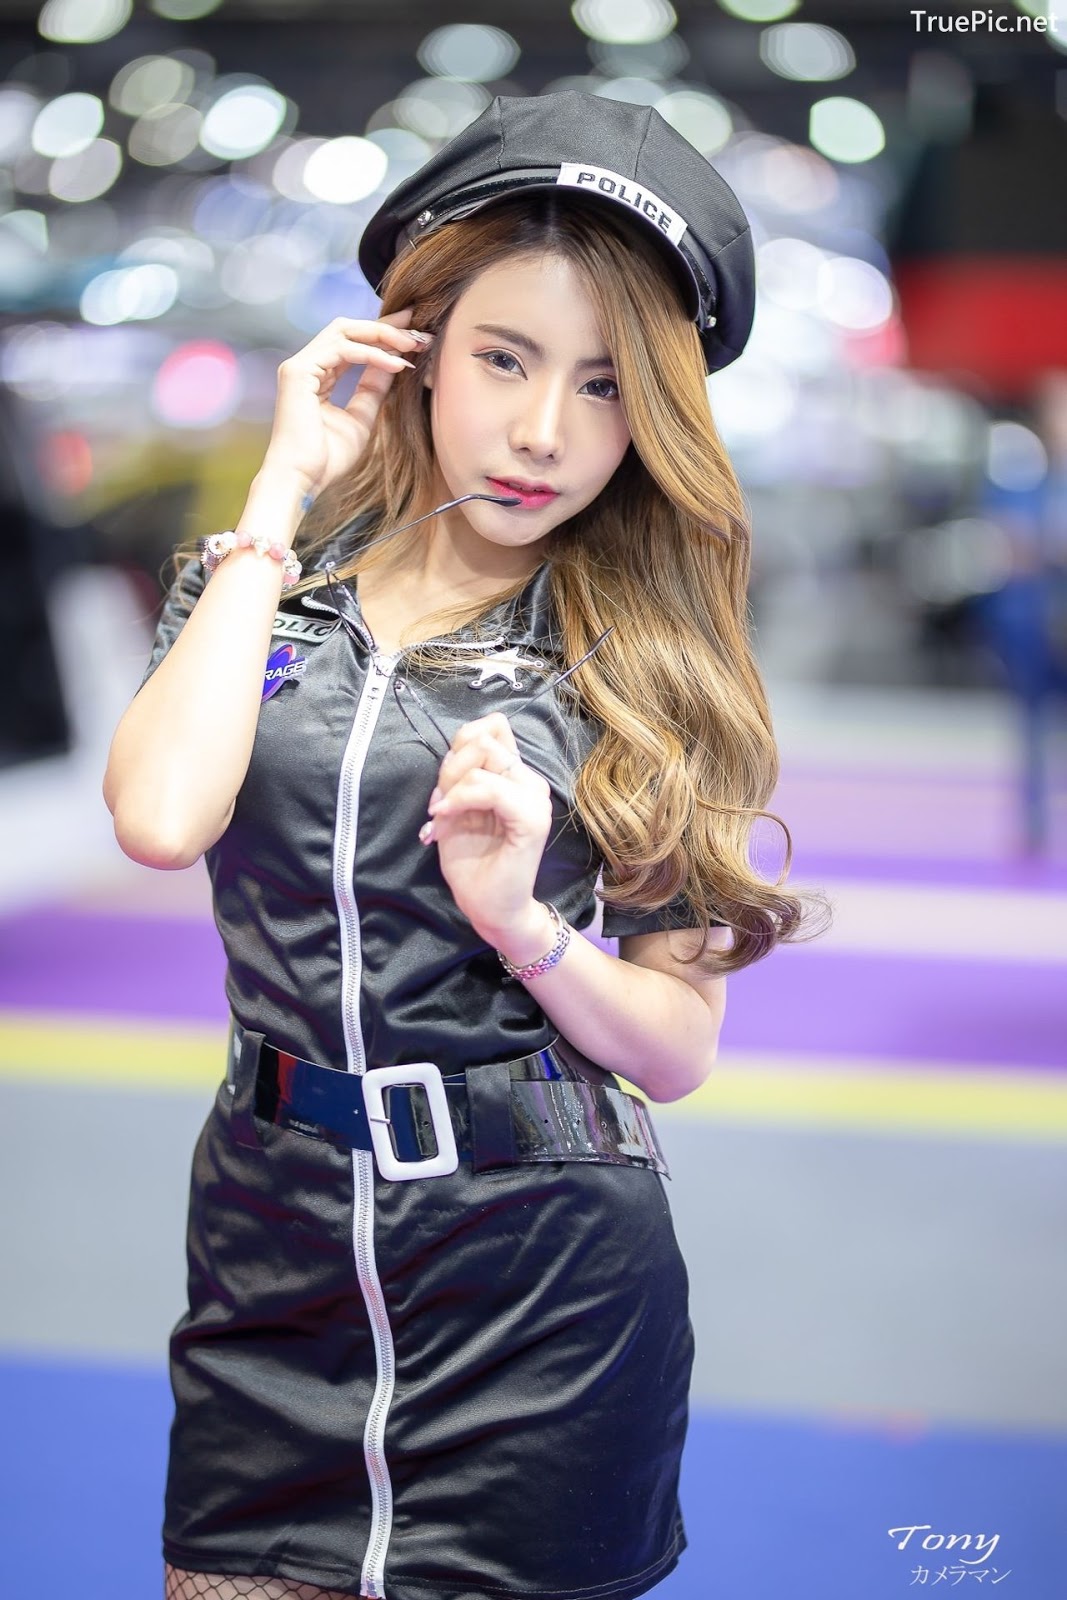 Image-Thailand-Hot-Model-Thai-Racing-Girl-At-Motor-Expo-2019-TruePic.net- Picture-104